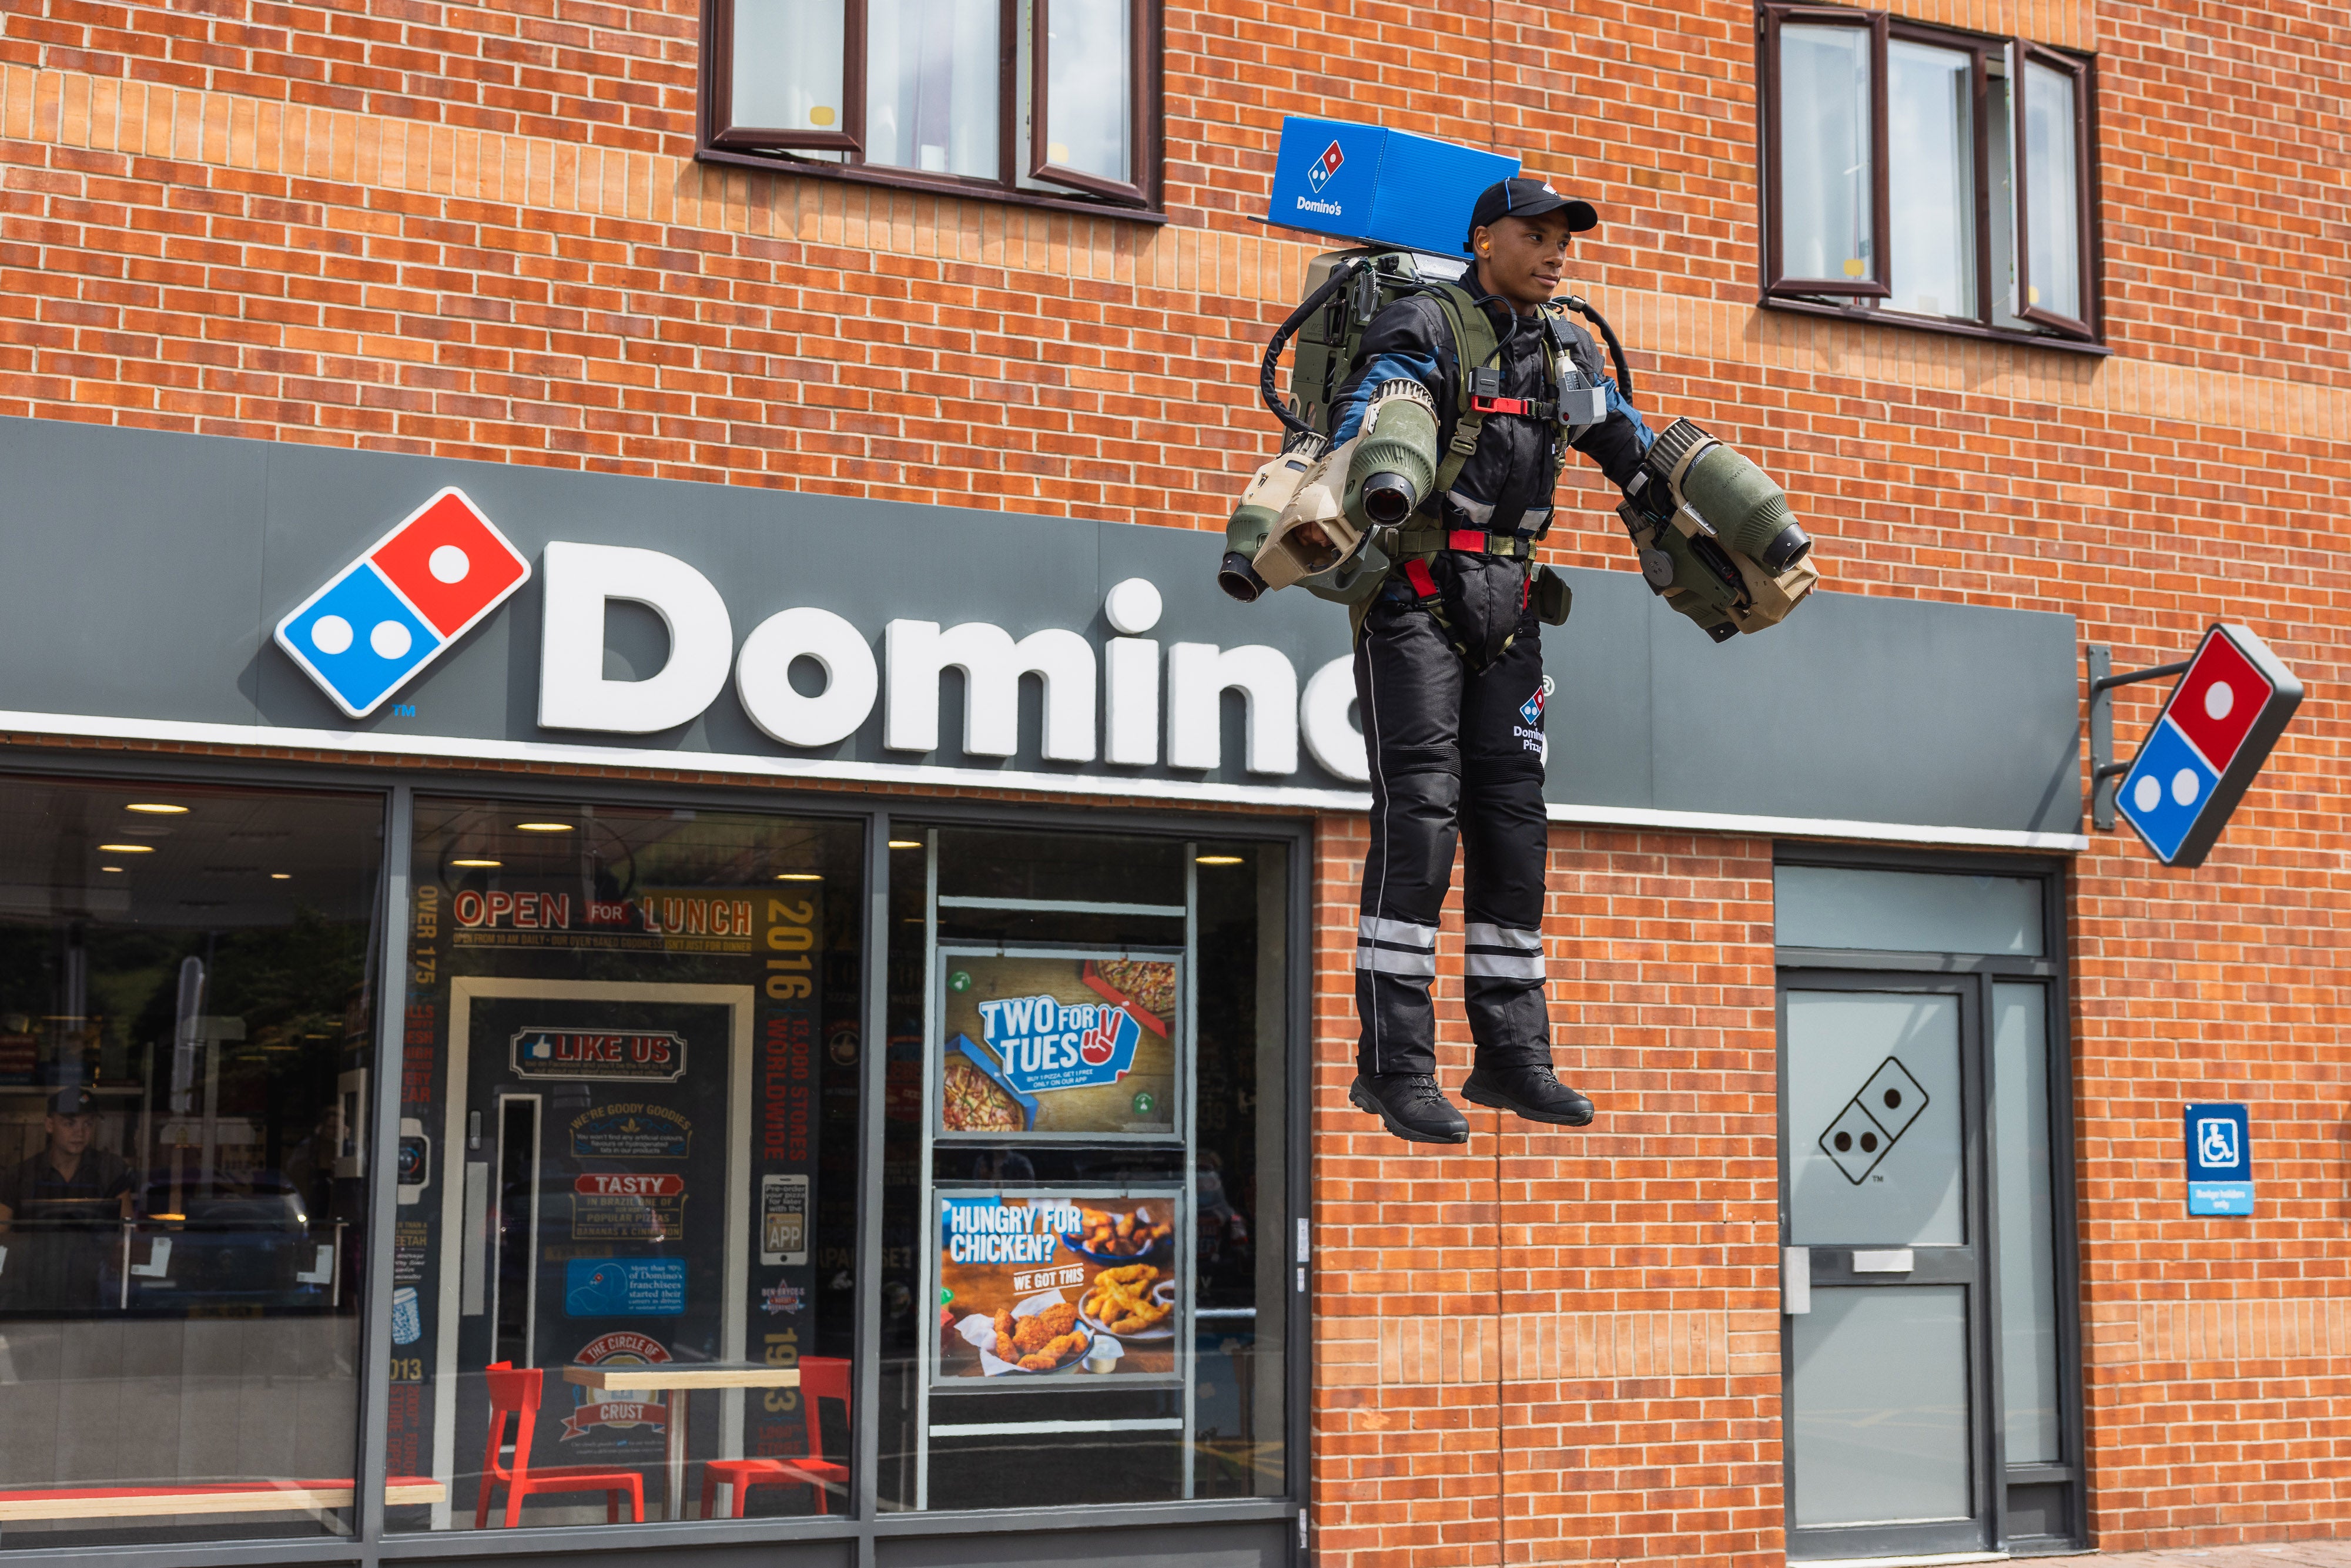 The jetsuit was used by the pizza chain to mark this year’s Glastonbury festival, which Elton John is set to headline